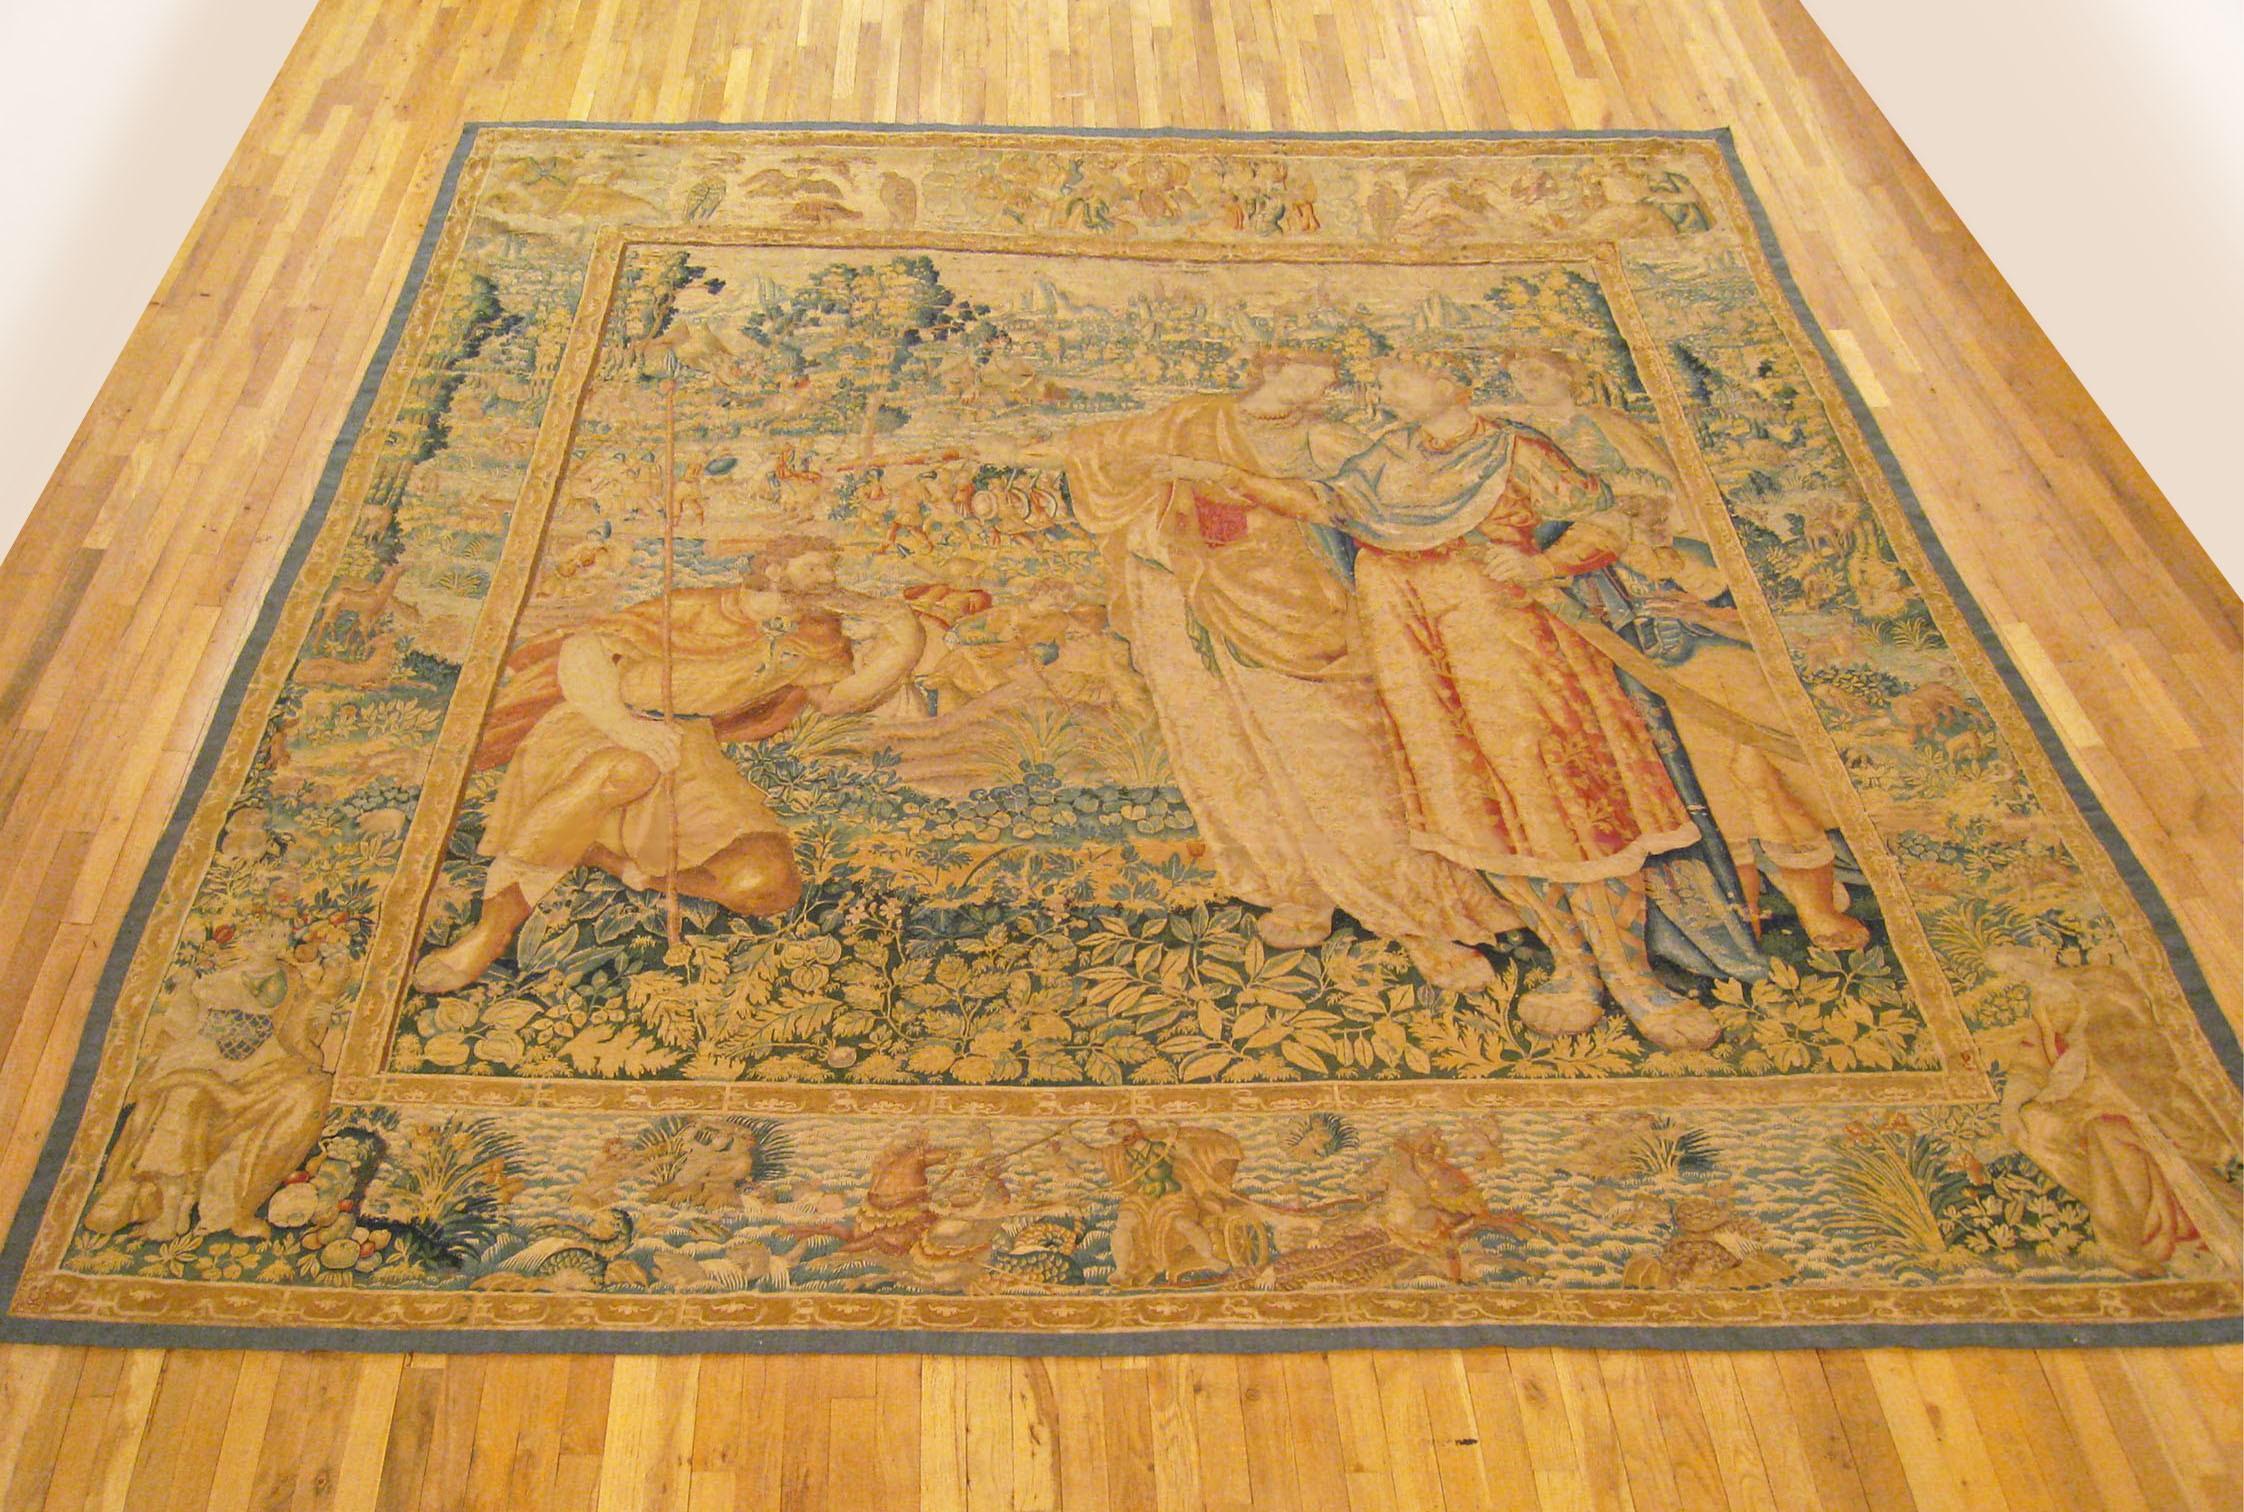 A Brussels historical tapestry, attributed to Martin Reymbouts, late 16th century. From the story of Scipio series, the renowned Roman general, a royal couple conveying honors upon Scipio, who kneels respectfully at left, expressing their